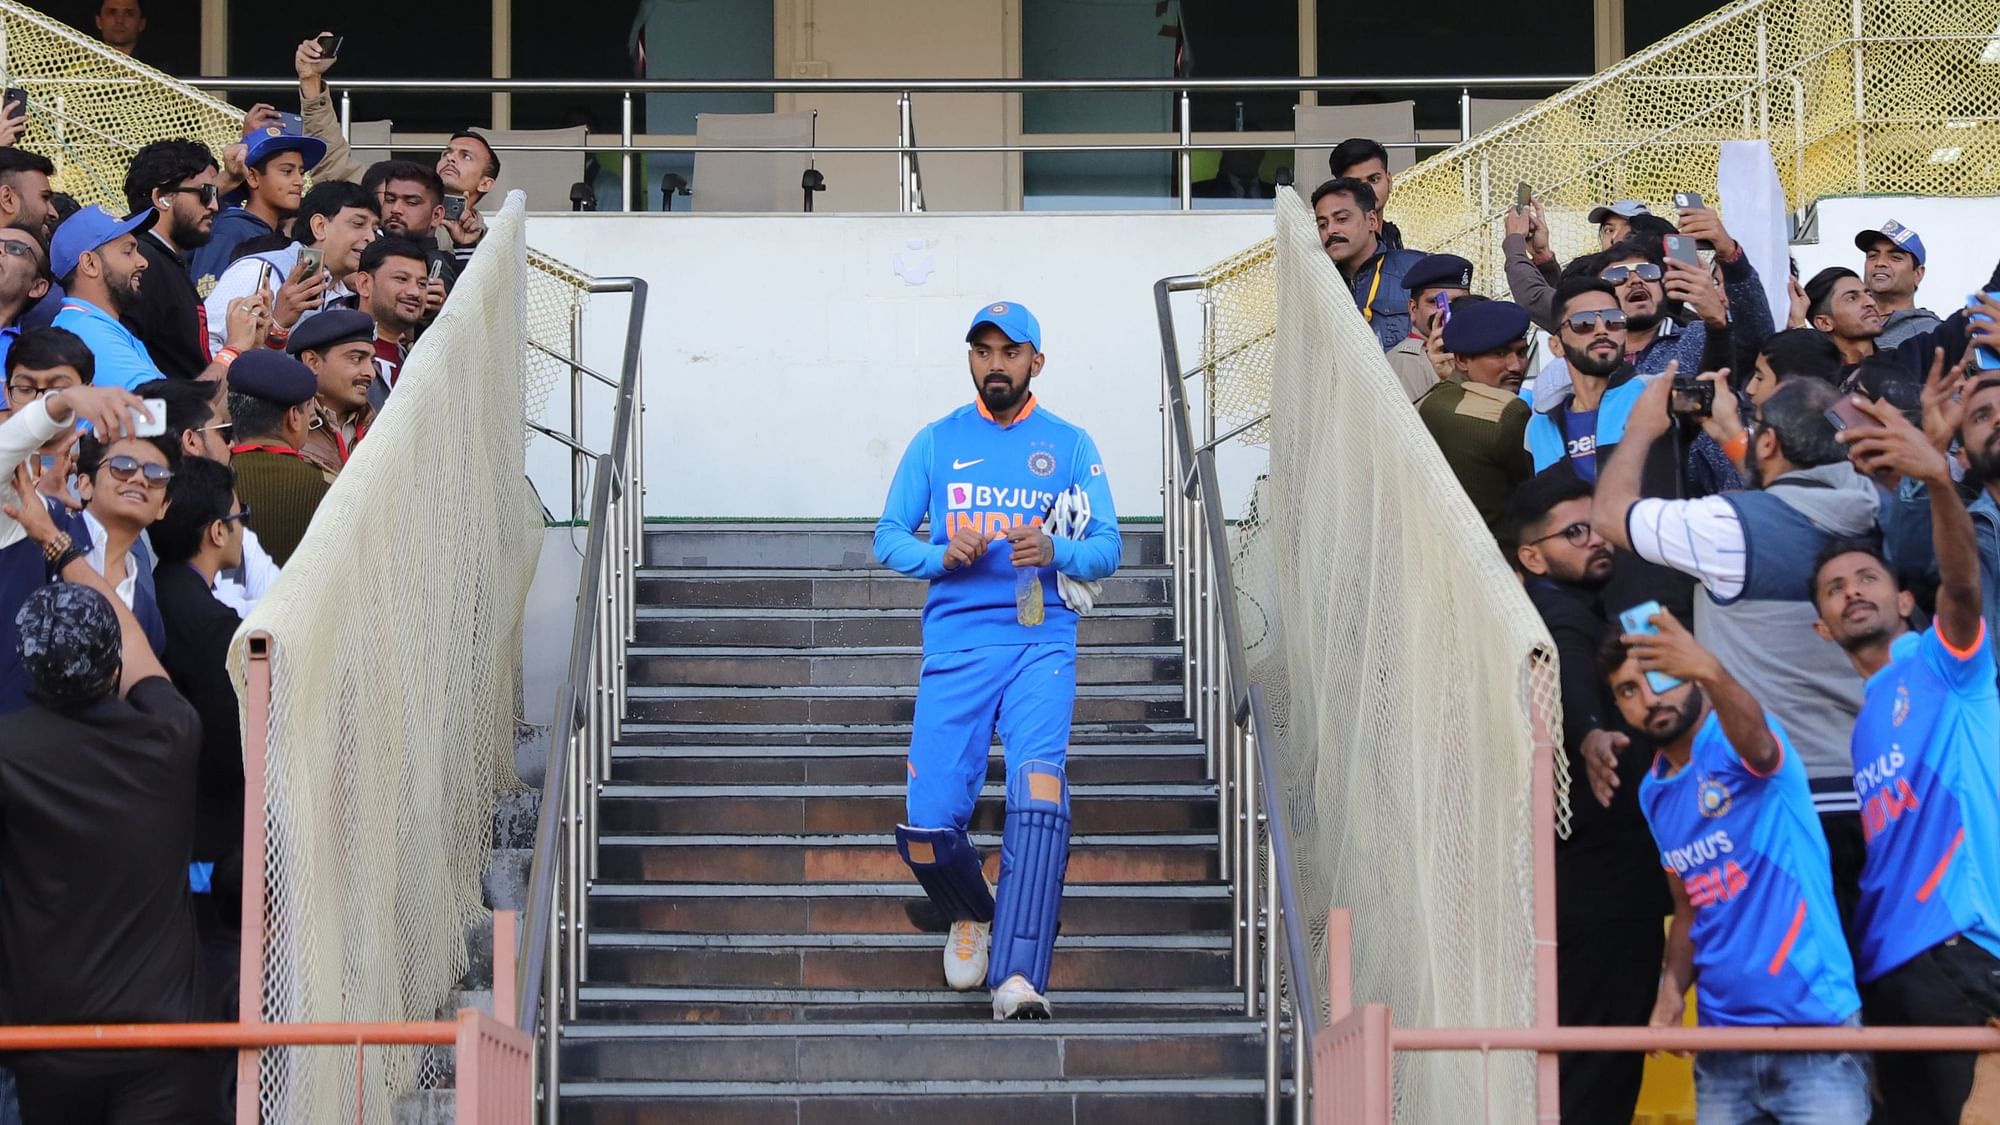 KL Rahul has been named India’s vice-captain in the limited-overs teams, in the absence of Rohit Sharma who is injured.